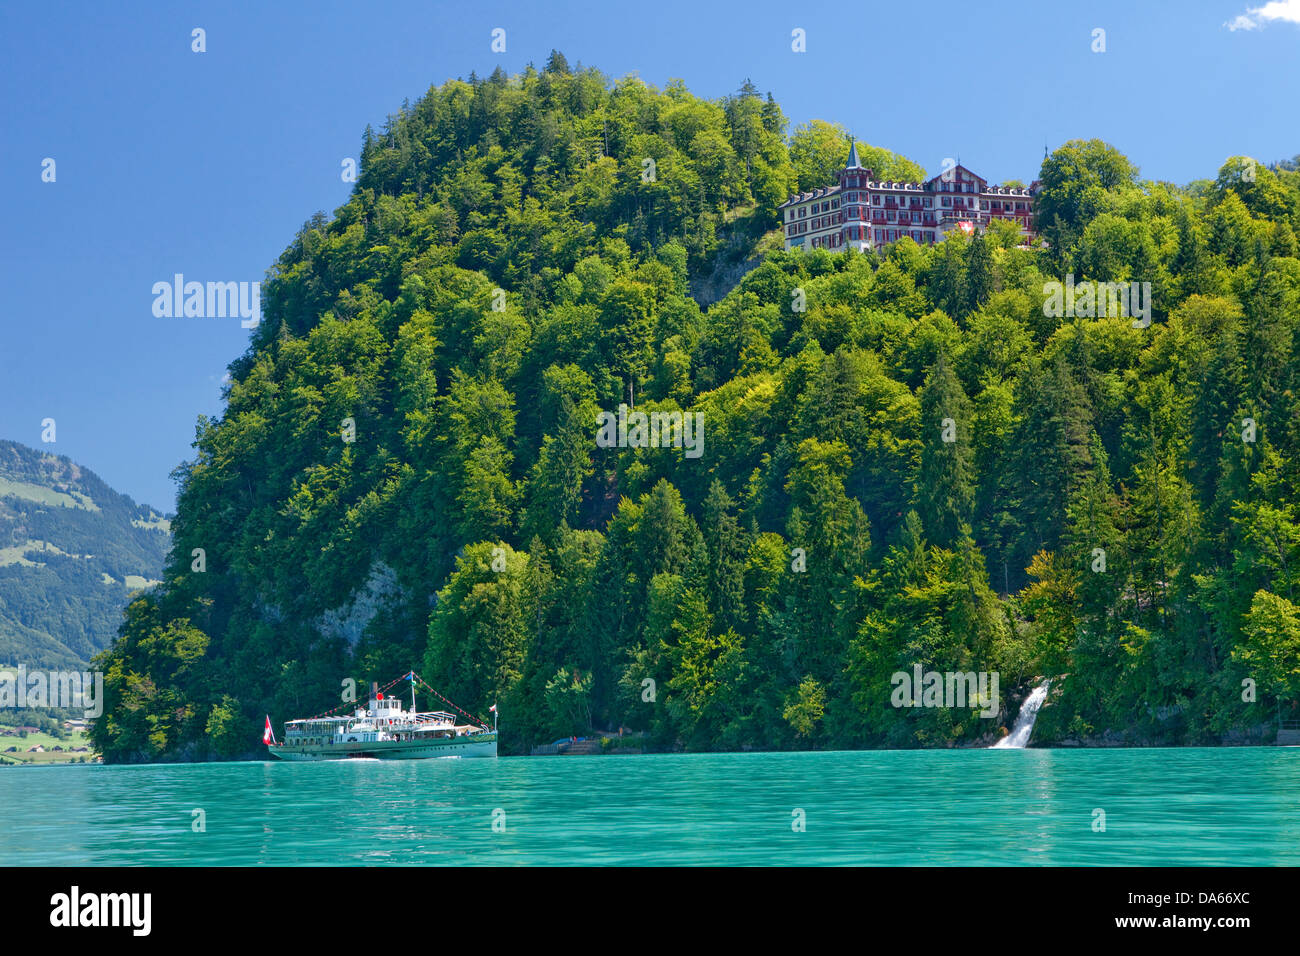 Steamboat, paddle steamer, Lötschberg, hotel, mountain torrent, ship, boat, ships, boats, water, waterfall, canton, Bern, Bernes Stock Photo